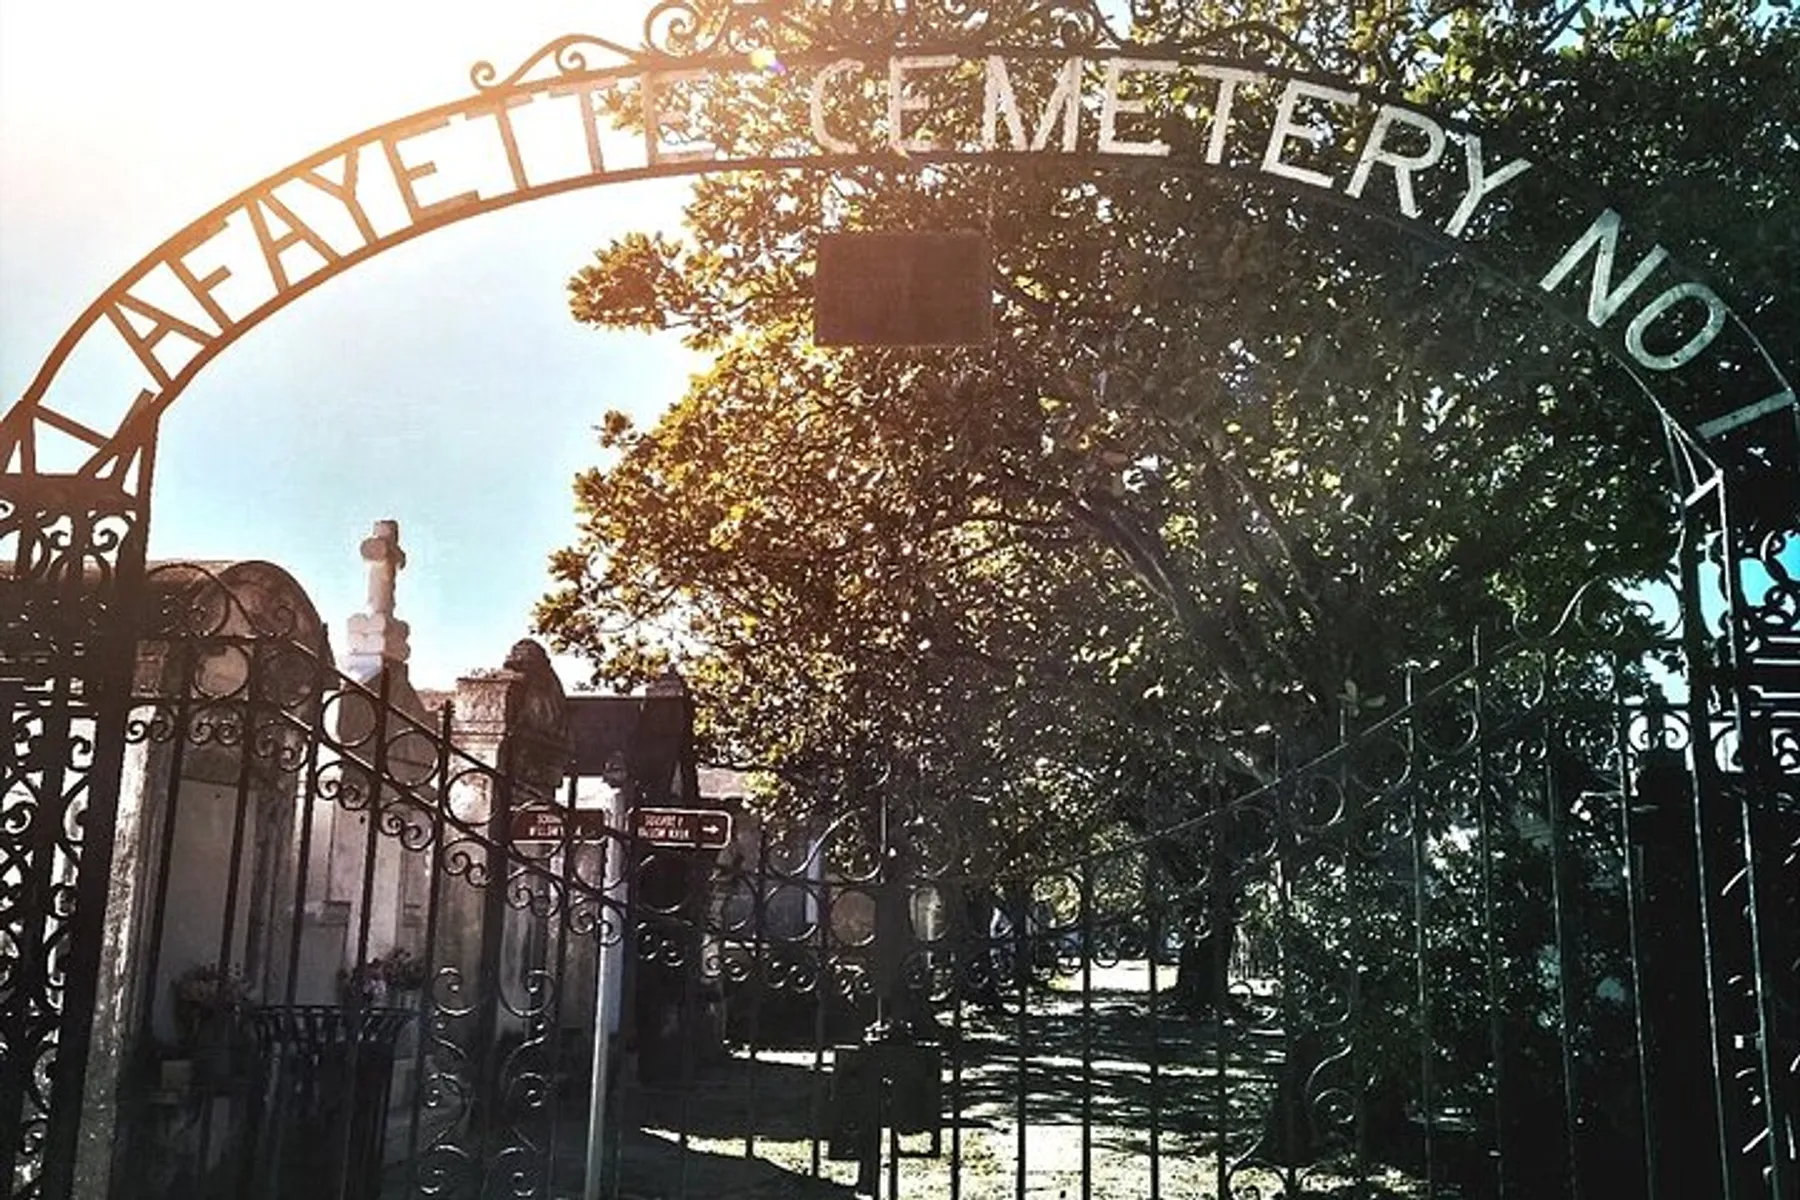 Sunlight filters through the trees behind the ornate iron gate of Lafayette Cemetery No. 1 in what appears to be a serene and historic resting place.